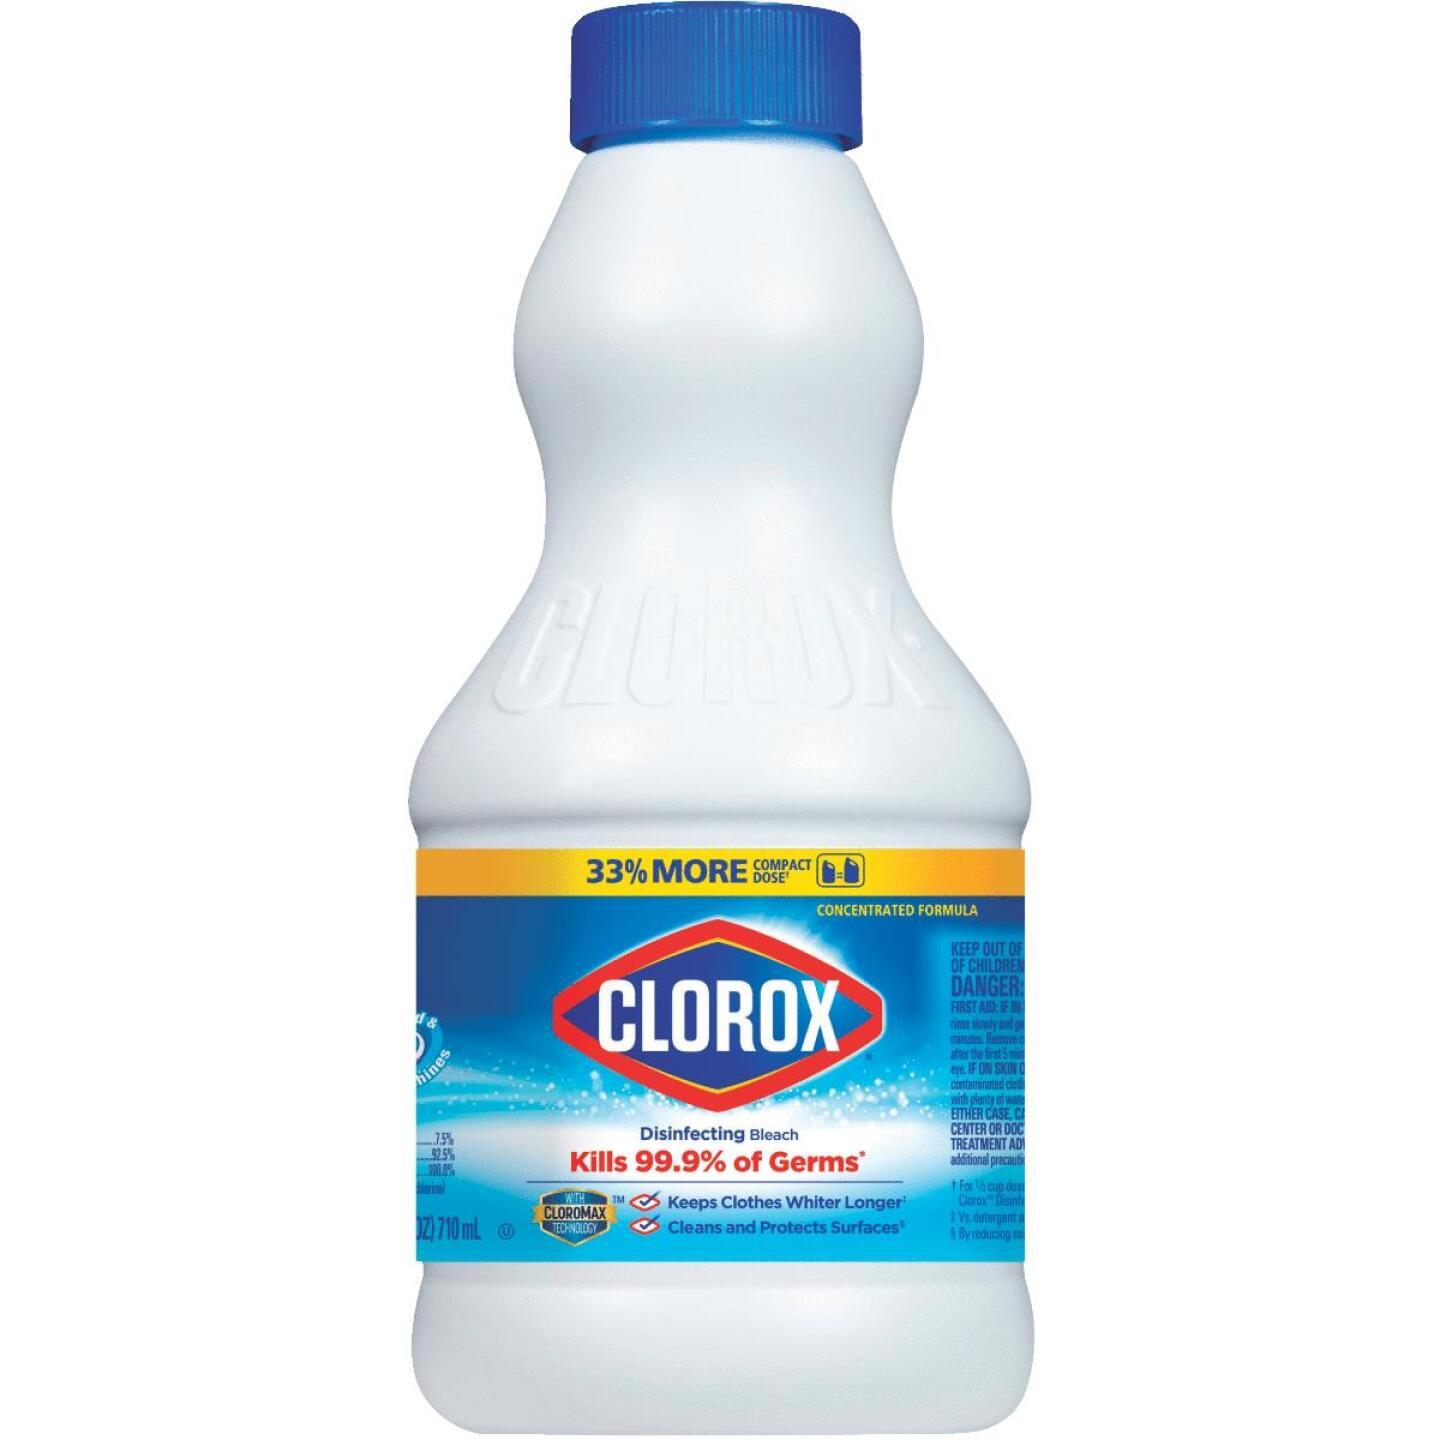 Clorox - Bleach Concentrated Regular 24oz - Case of 12